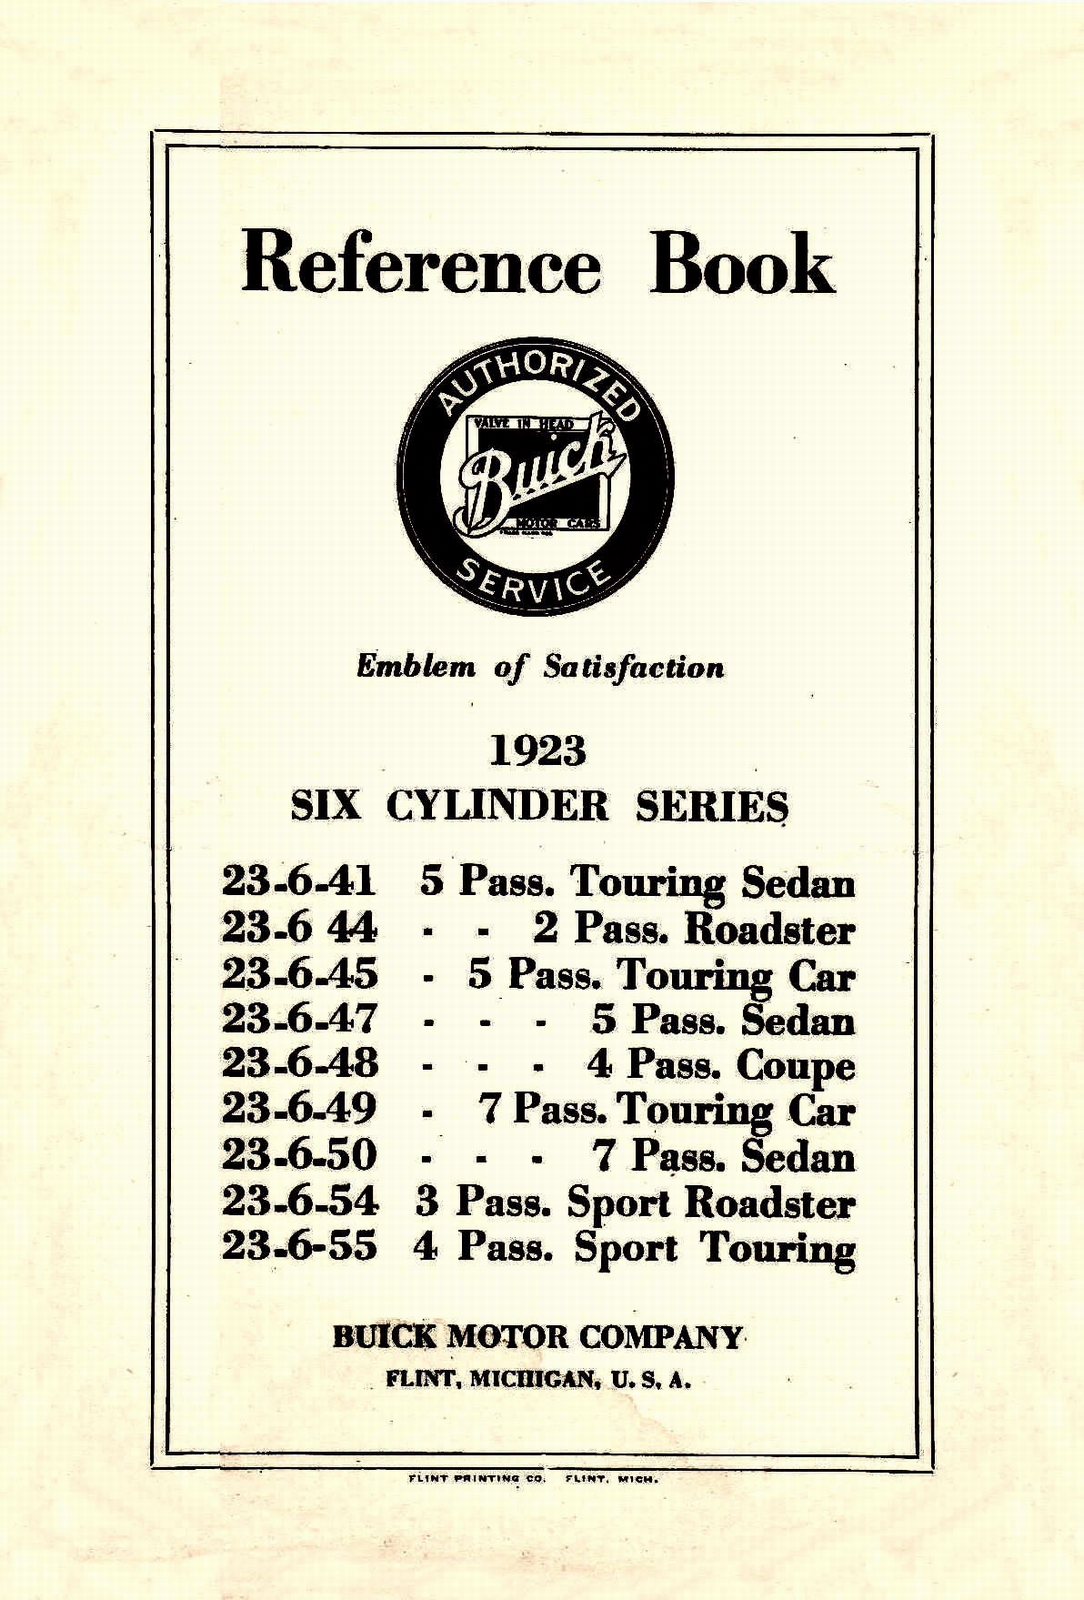 n_1923 Buick 6 cyl Reference Book-01.jpg